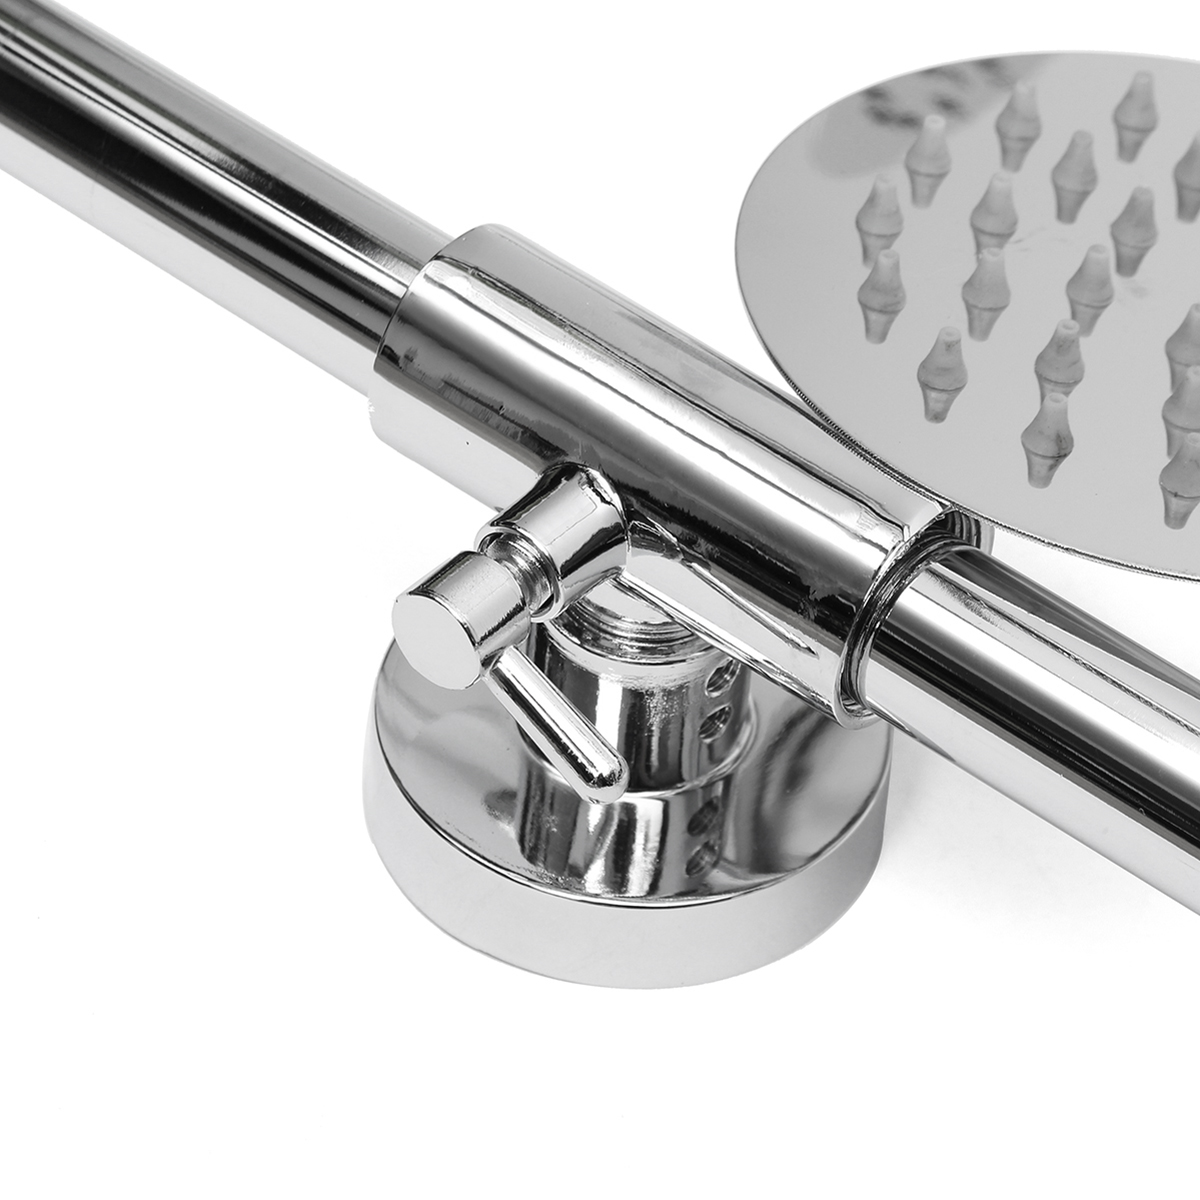 Chrome-Brass-Shower-Head-Set-Supercharged-Hot-Cold-Shower-Faucet-with-Hand-Shower-Tub-Mixer-Tap-1255807